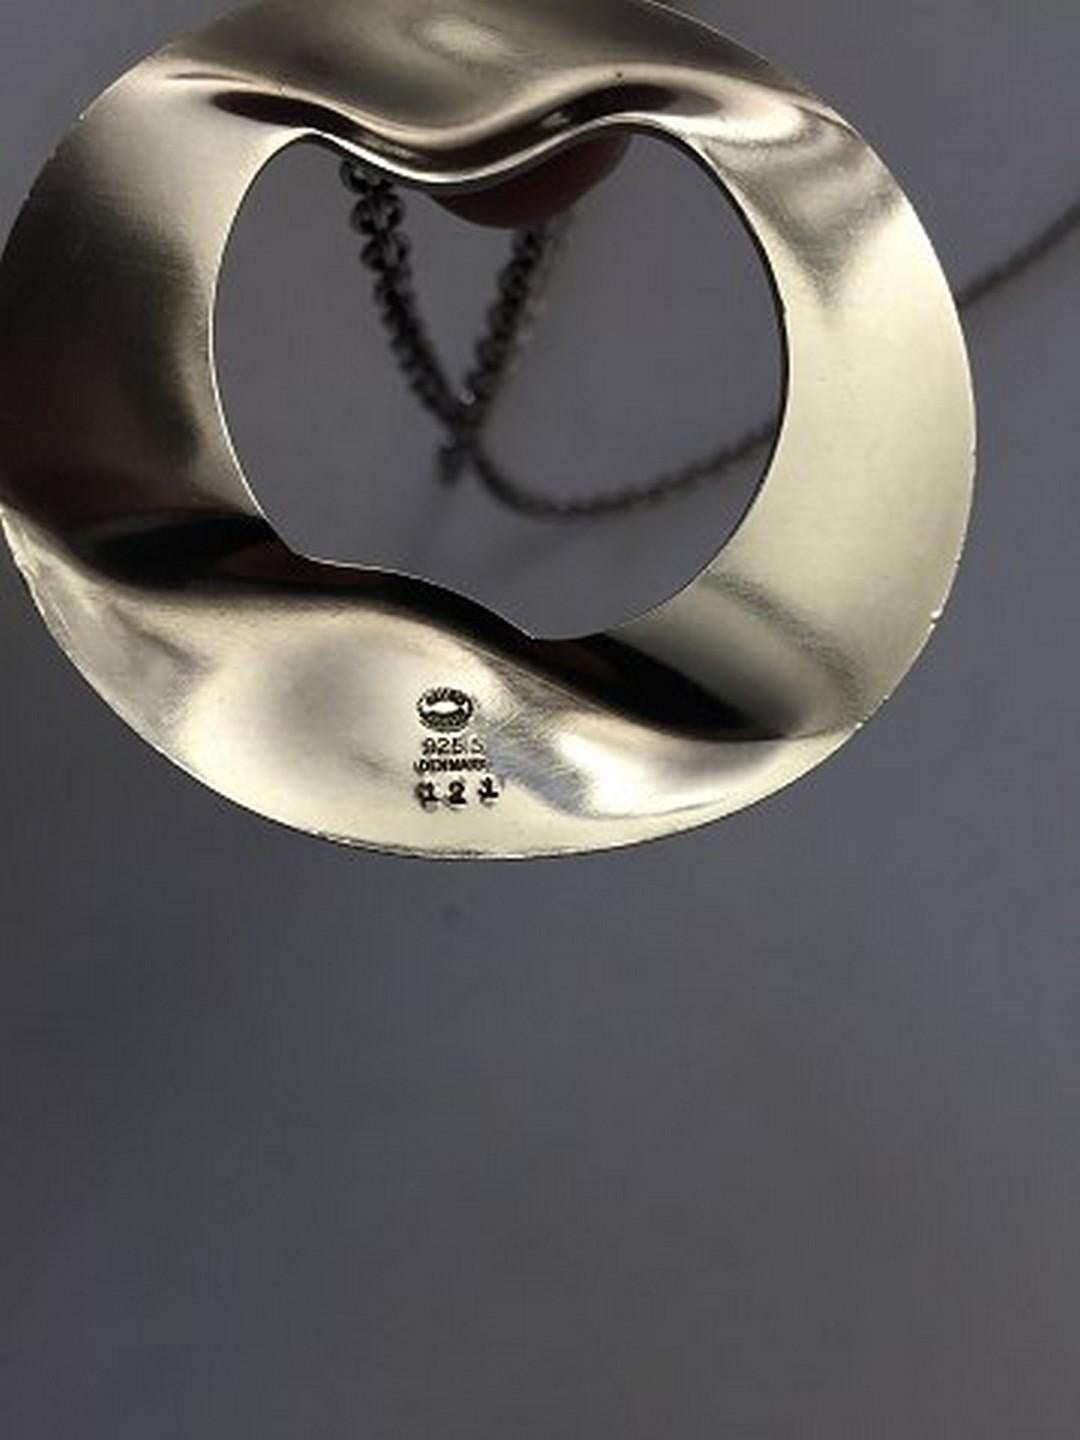 Georg Jensen Henning Koppel Sterling Silver Pendant with Chain No 121. Pendant measure 6.5 cm x 6 cm / 2 1/2 in. x 2 1/3 in. Chain measures 70 cm / 27 9/16 in. Weighs 43 g / 1.60 oz.